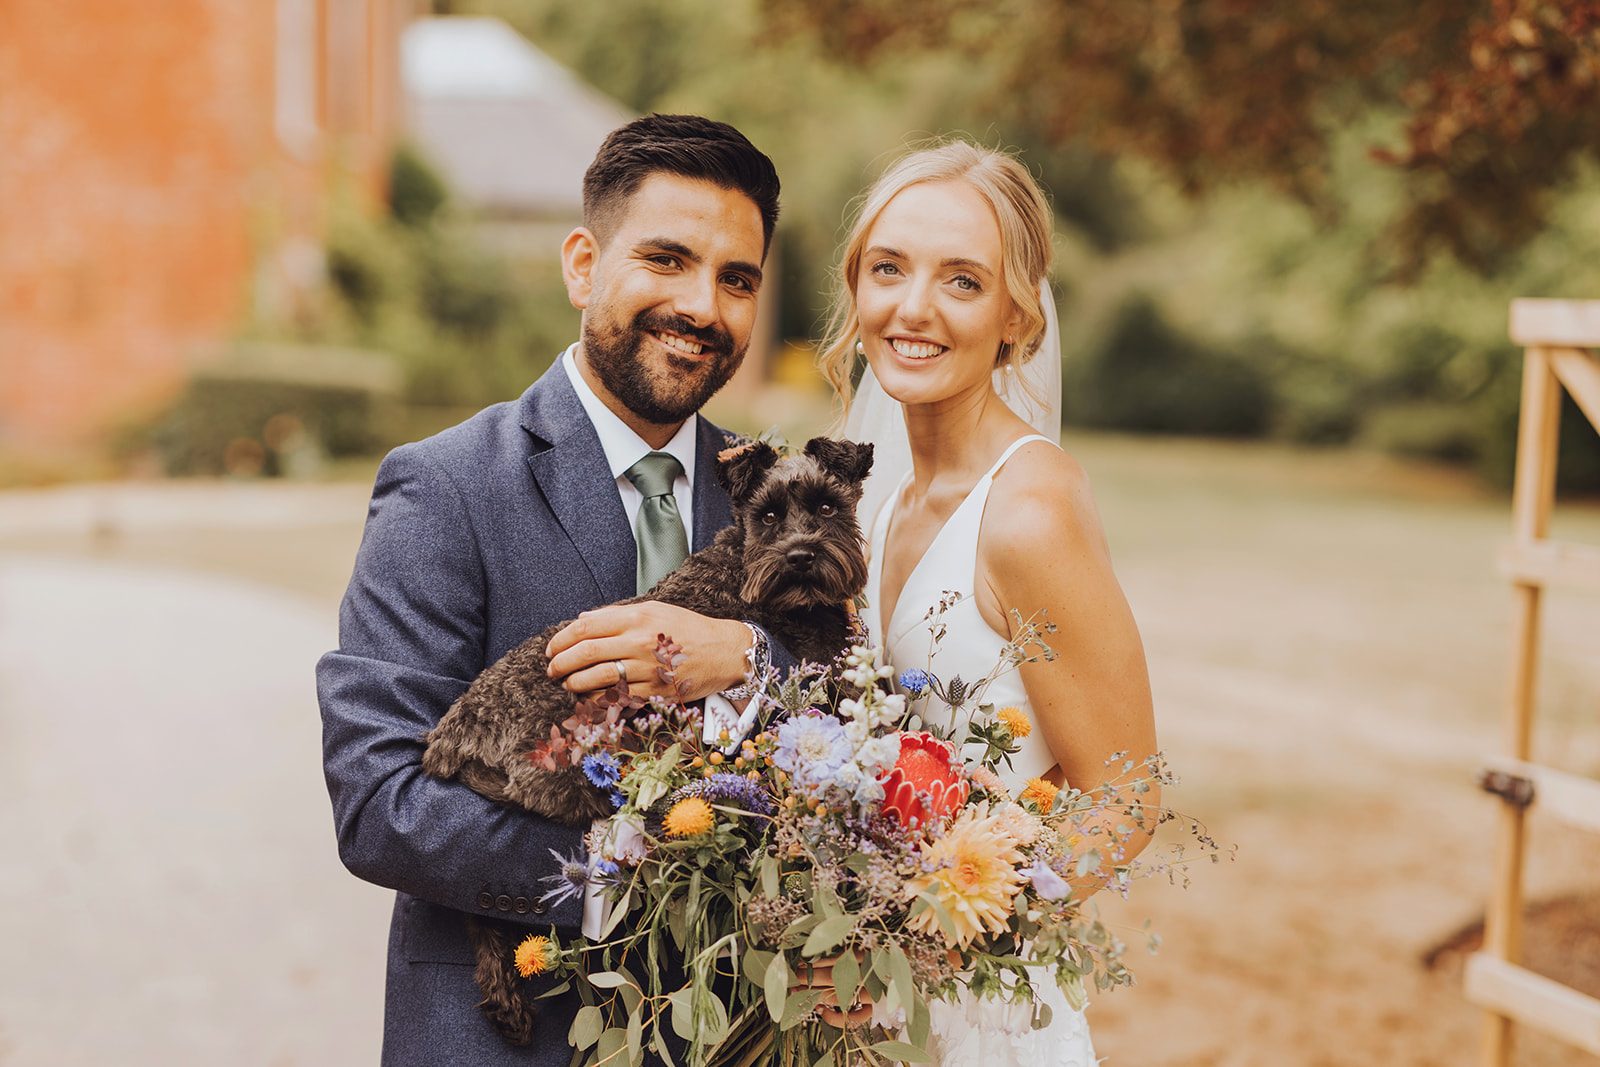 Couple photos with your dog at syrencot house